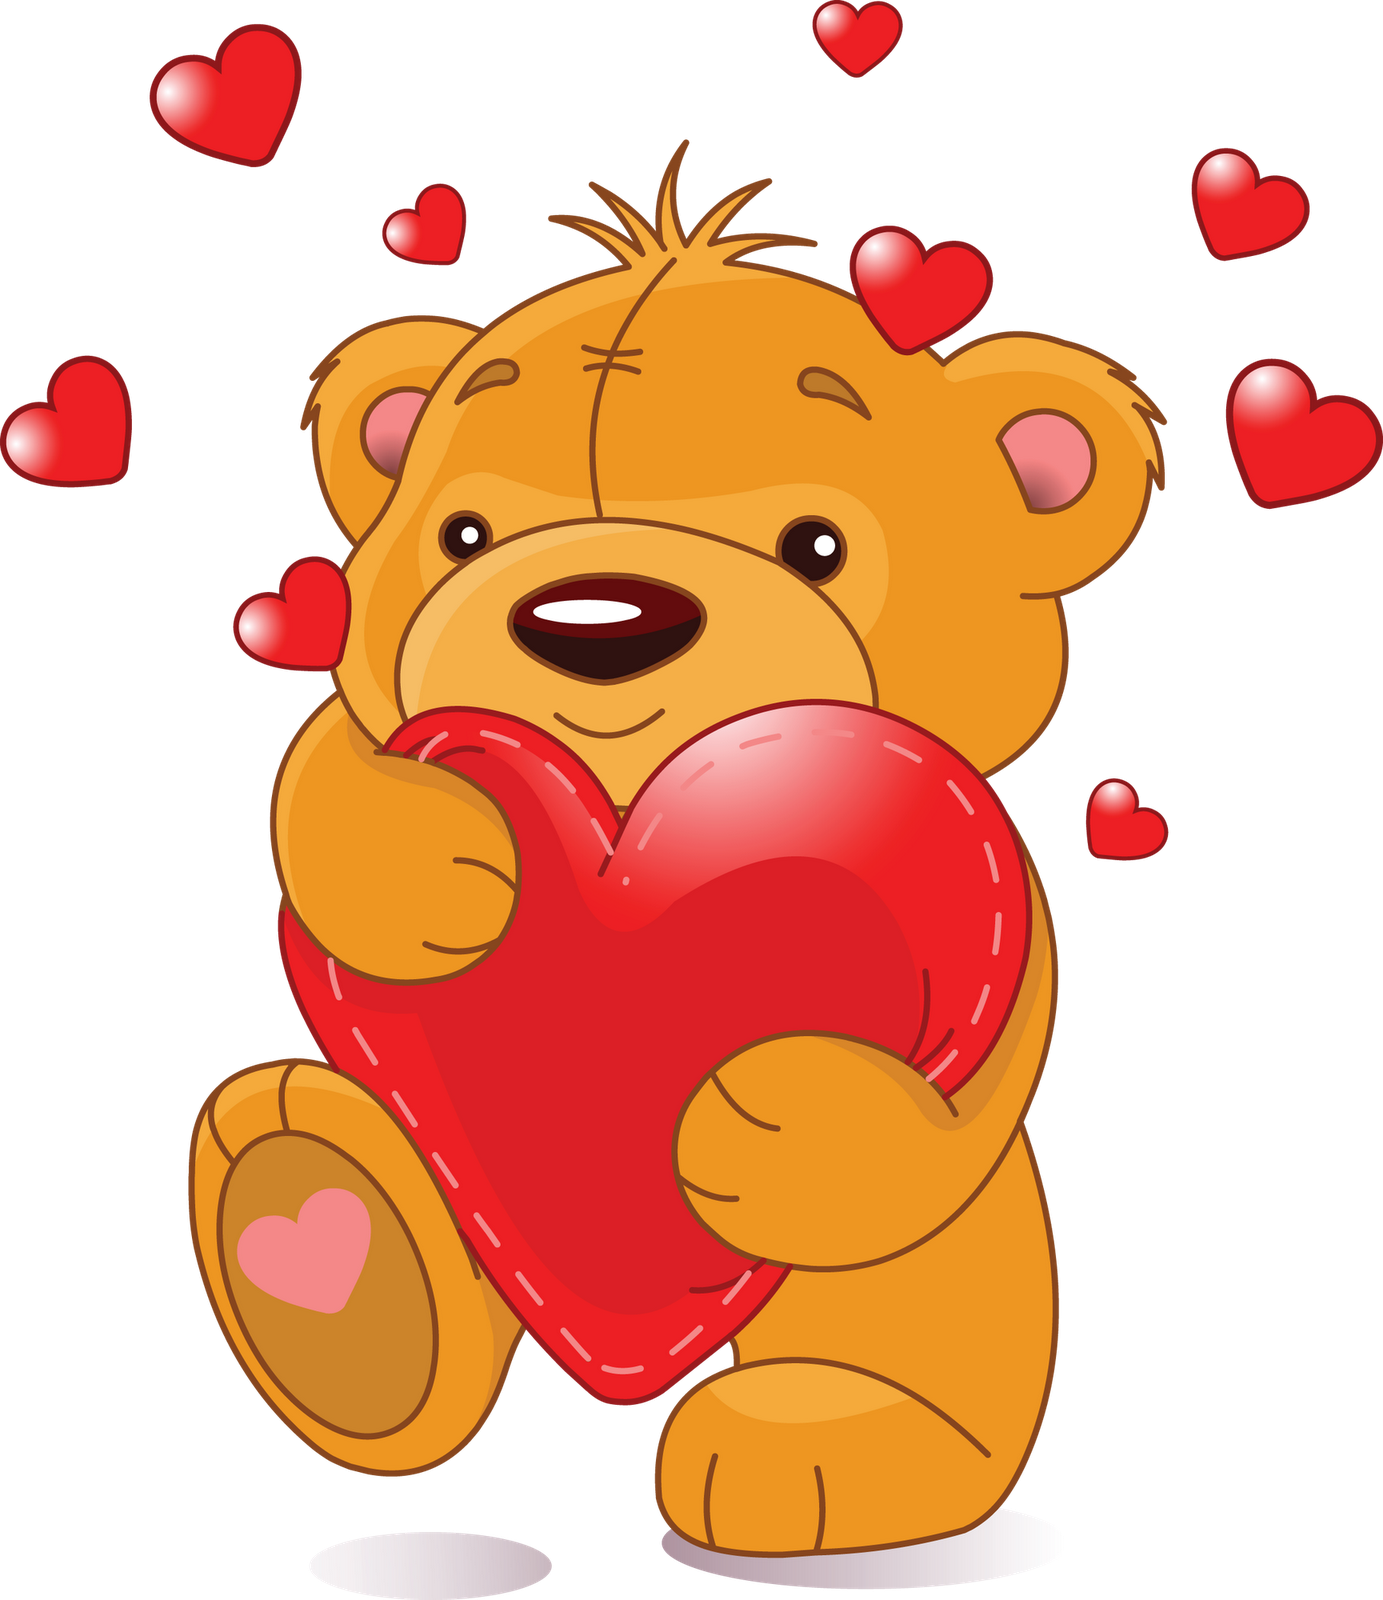 hugging clipart welcome